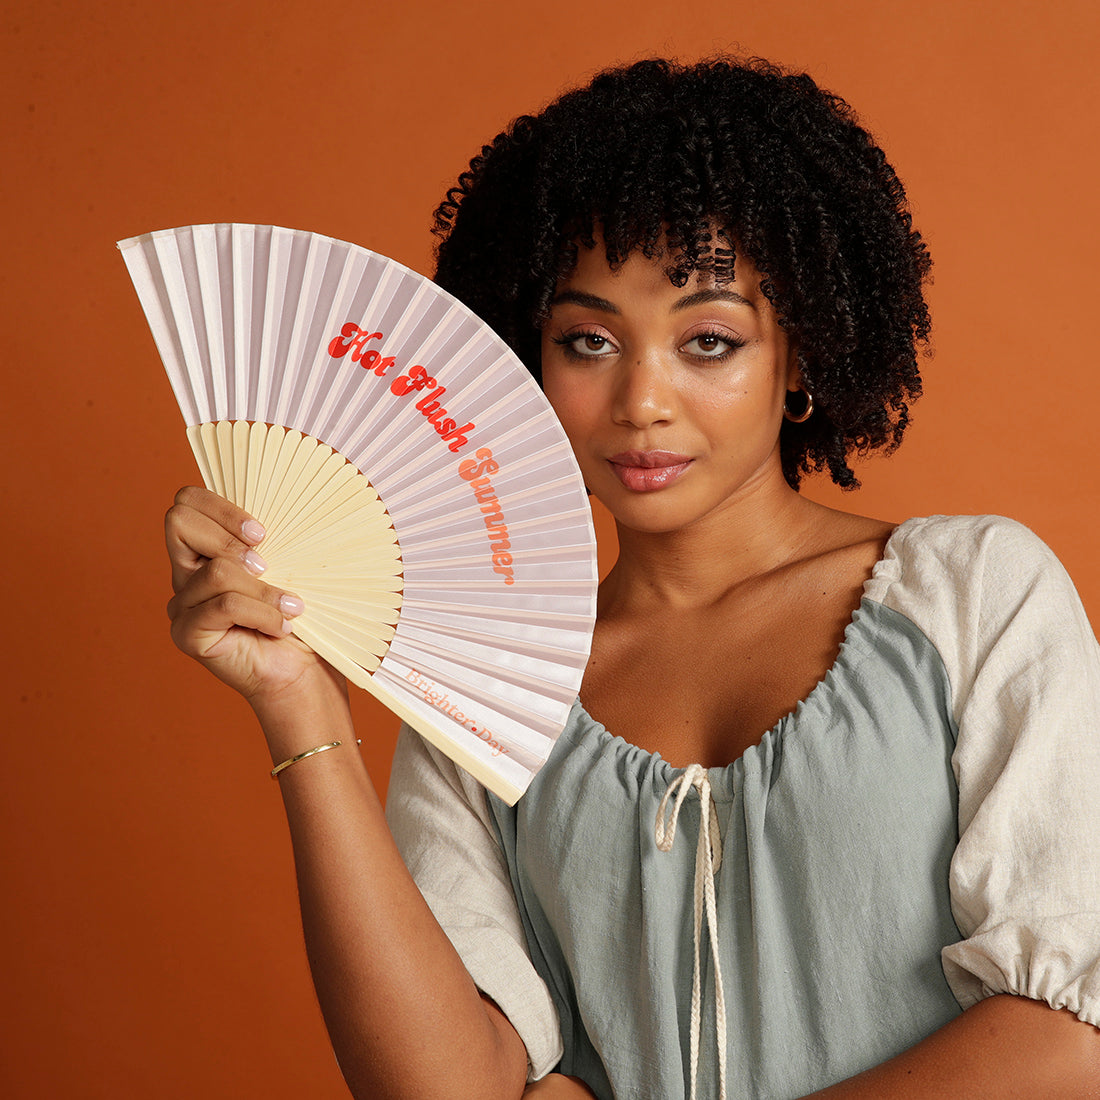 Curly haired woman holding pink Hot Flush Summer Fan too her face